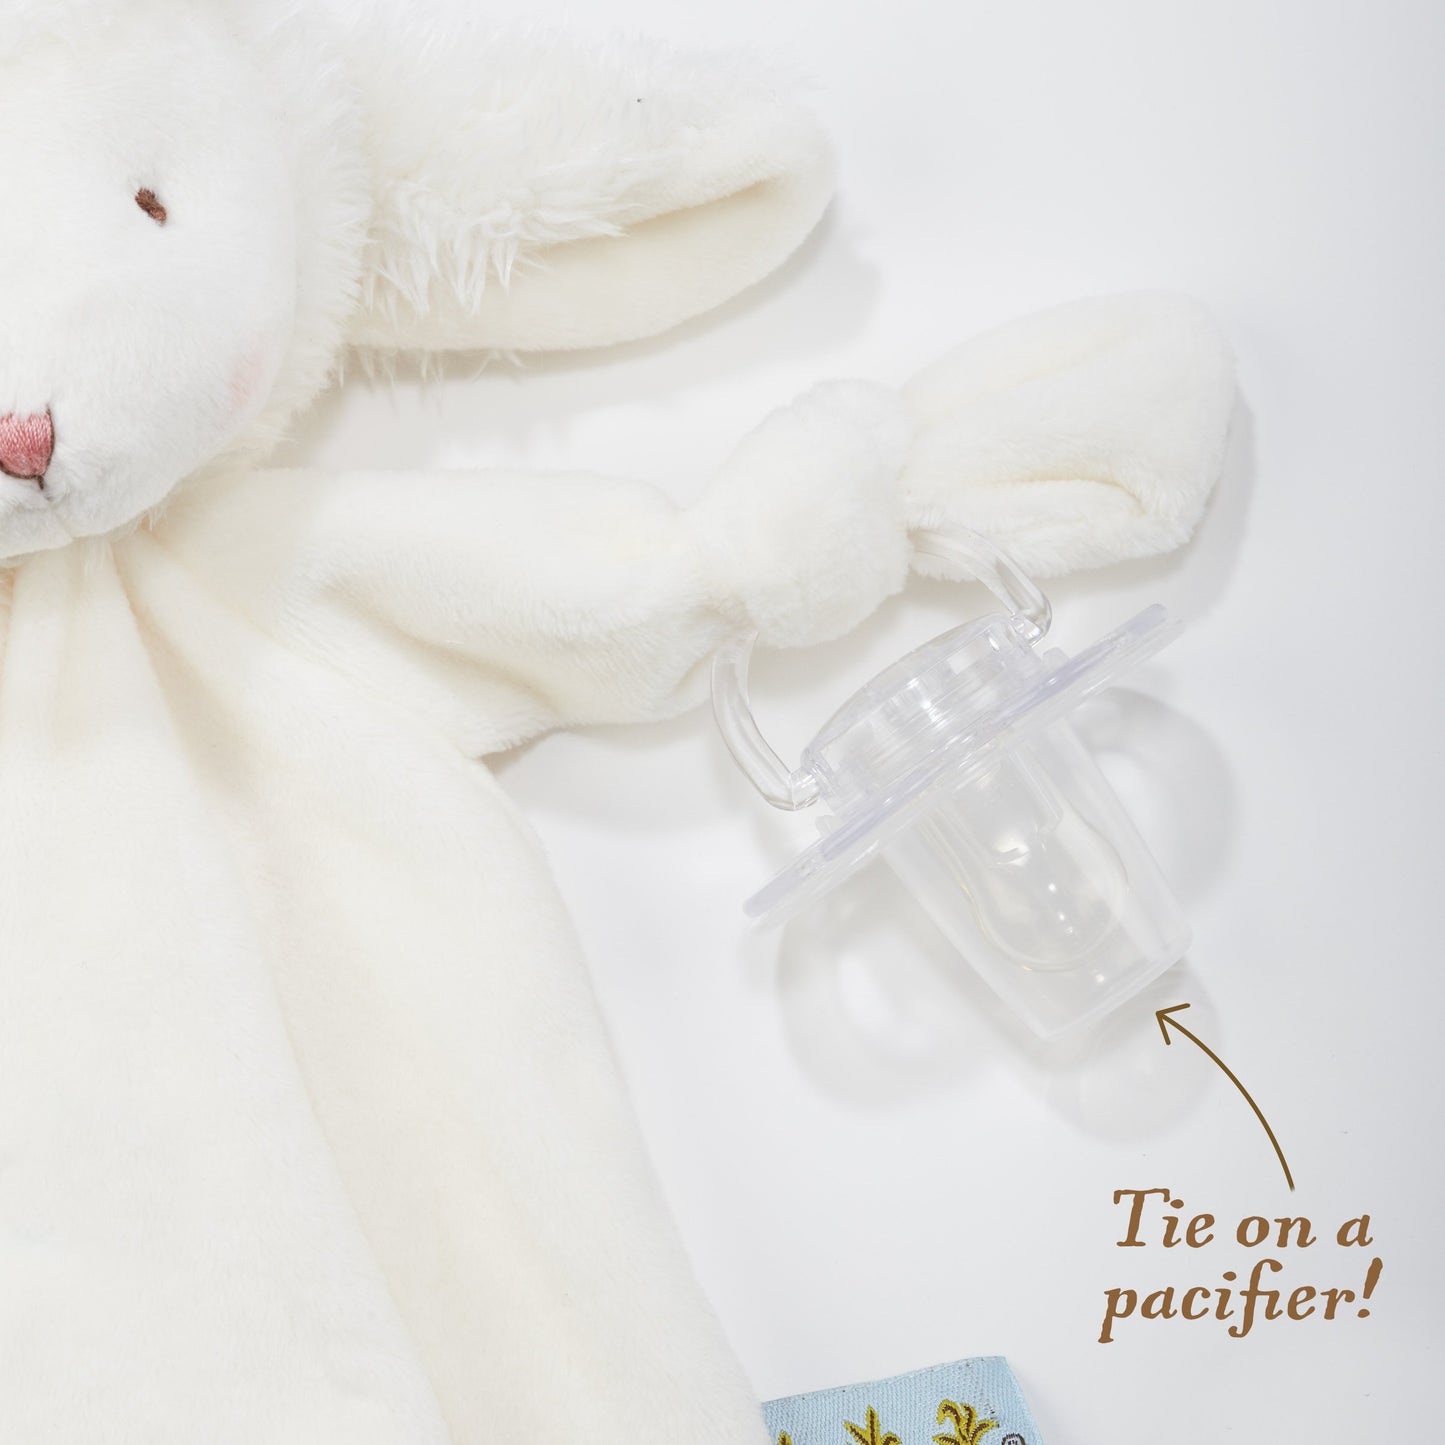 Bloom Bunny Knotty Friend Pacifier Holder